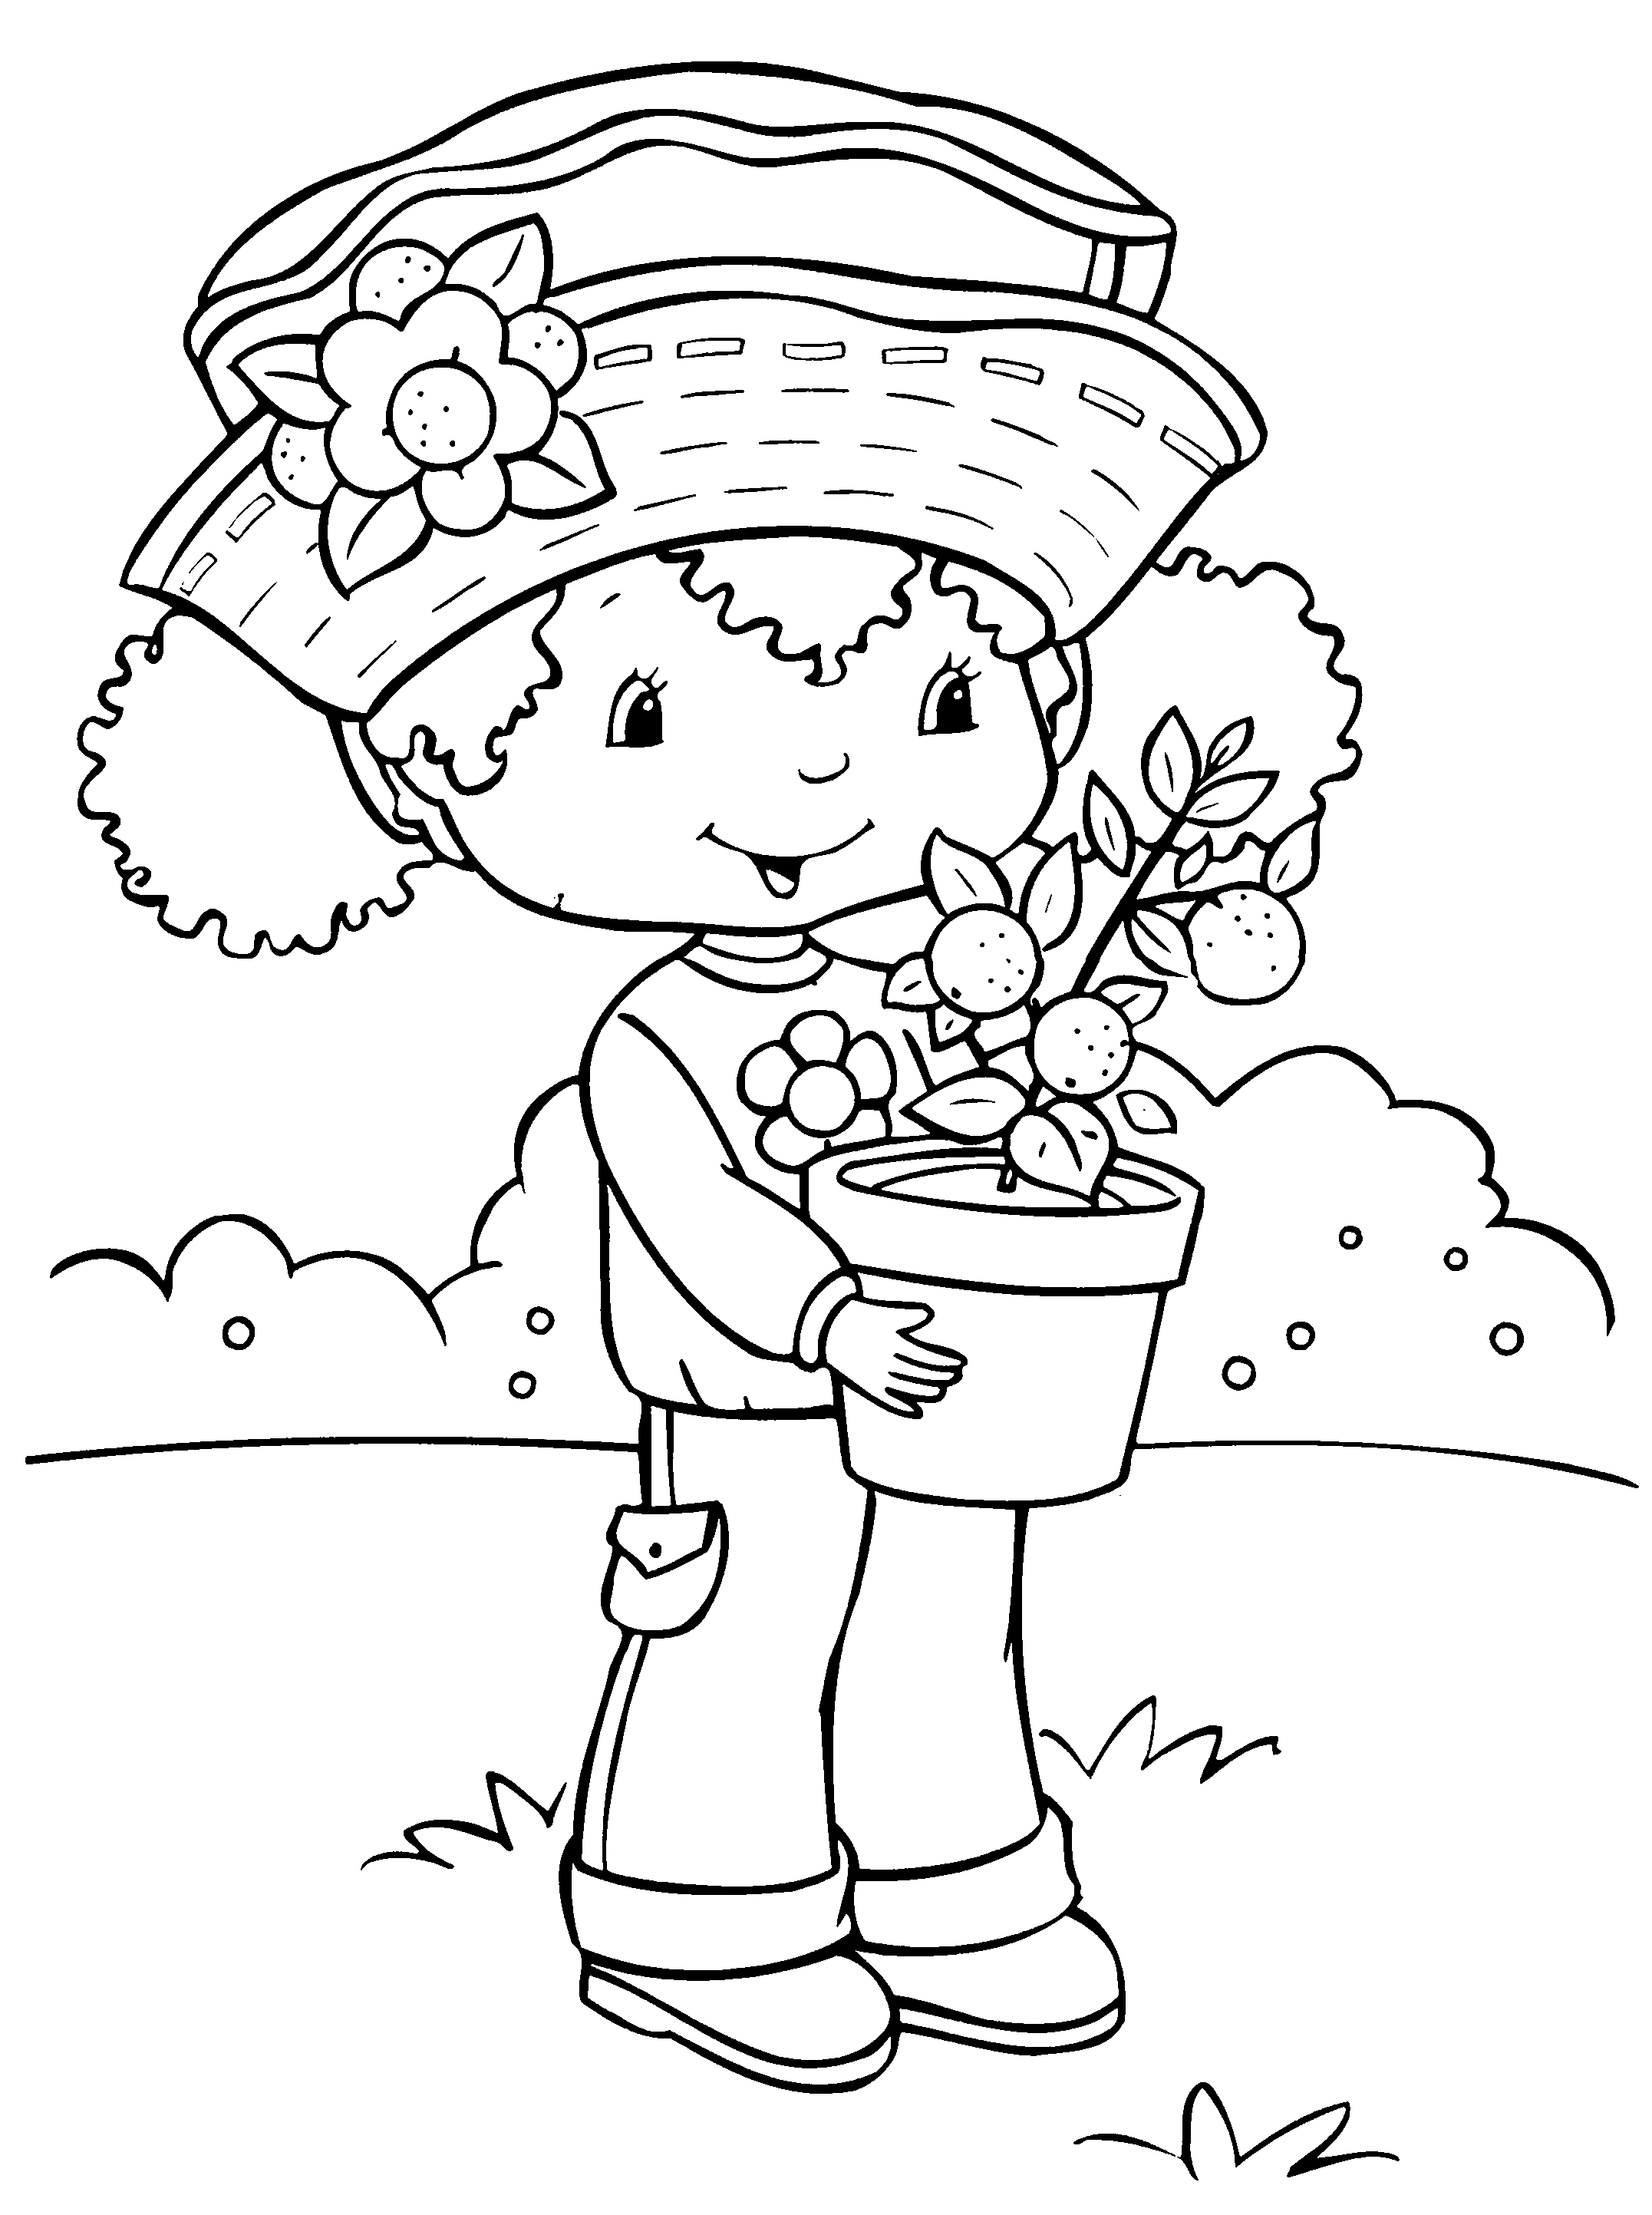 Charlotte Cartoon coloring page - free printable coloring pages on  